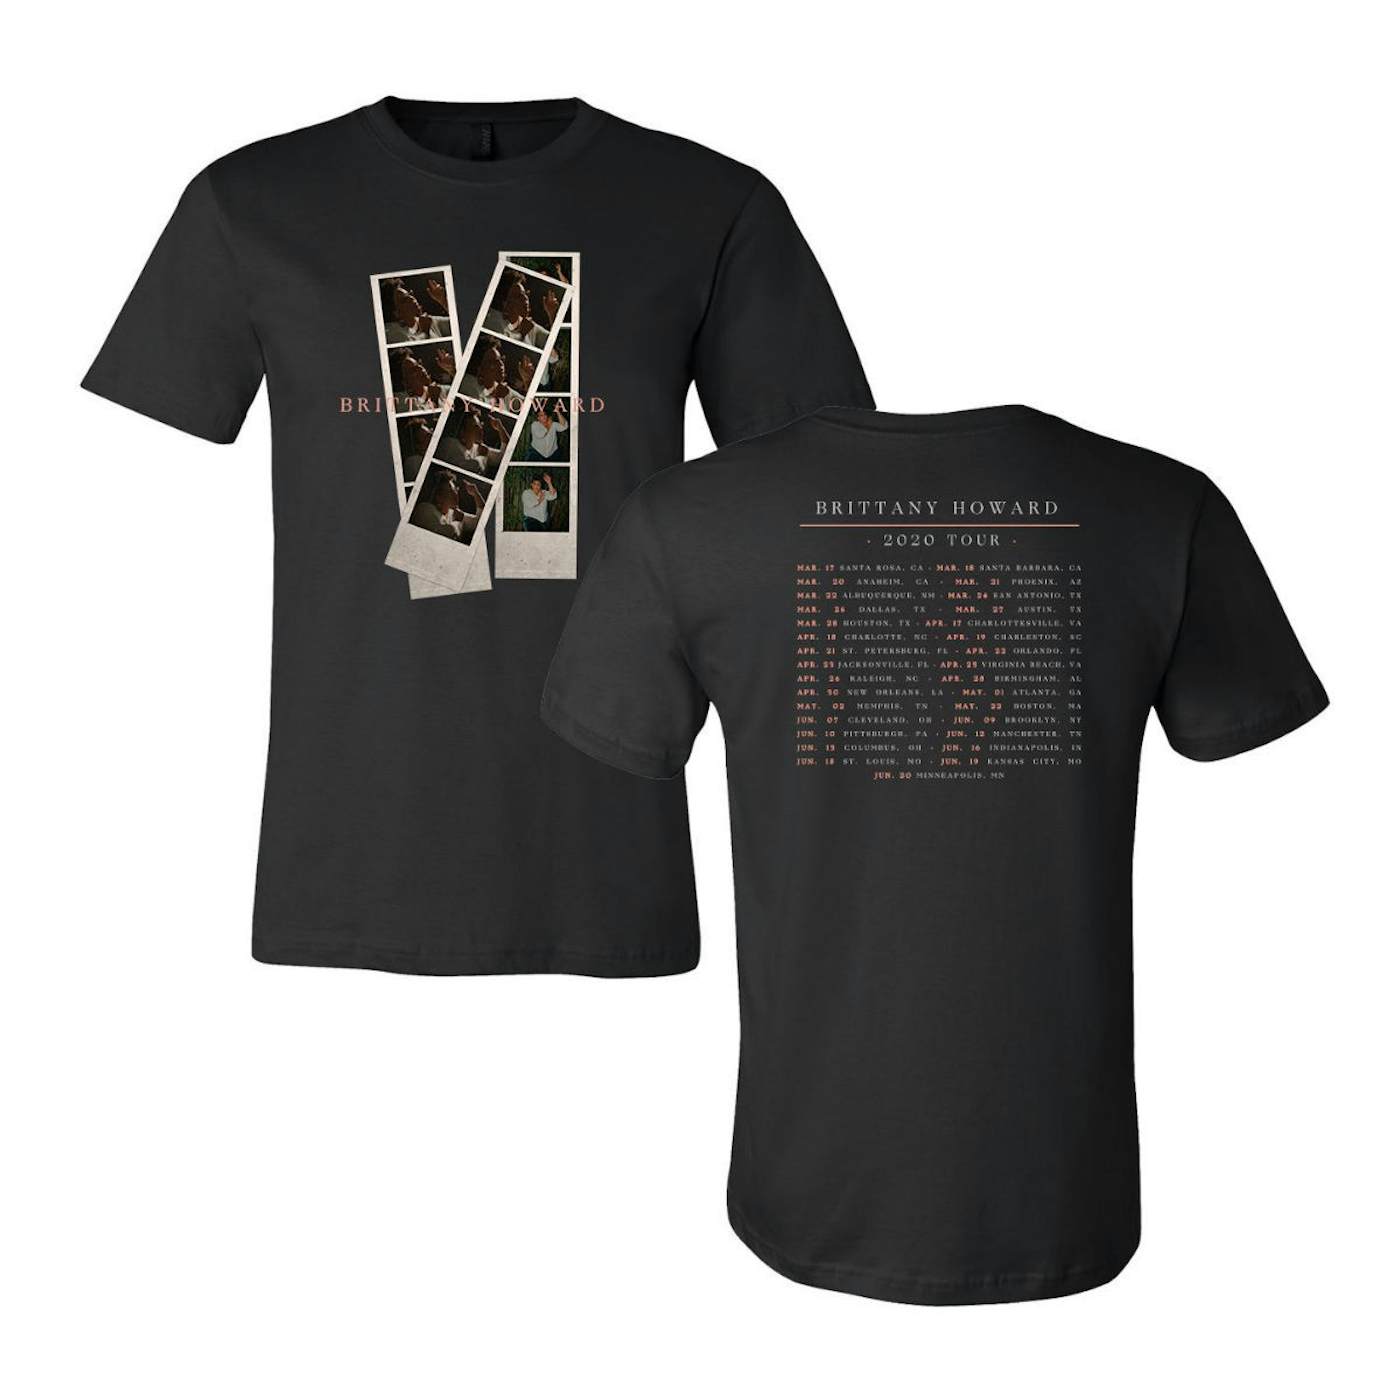 Brittany Howard Photo Booth Tour Tee